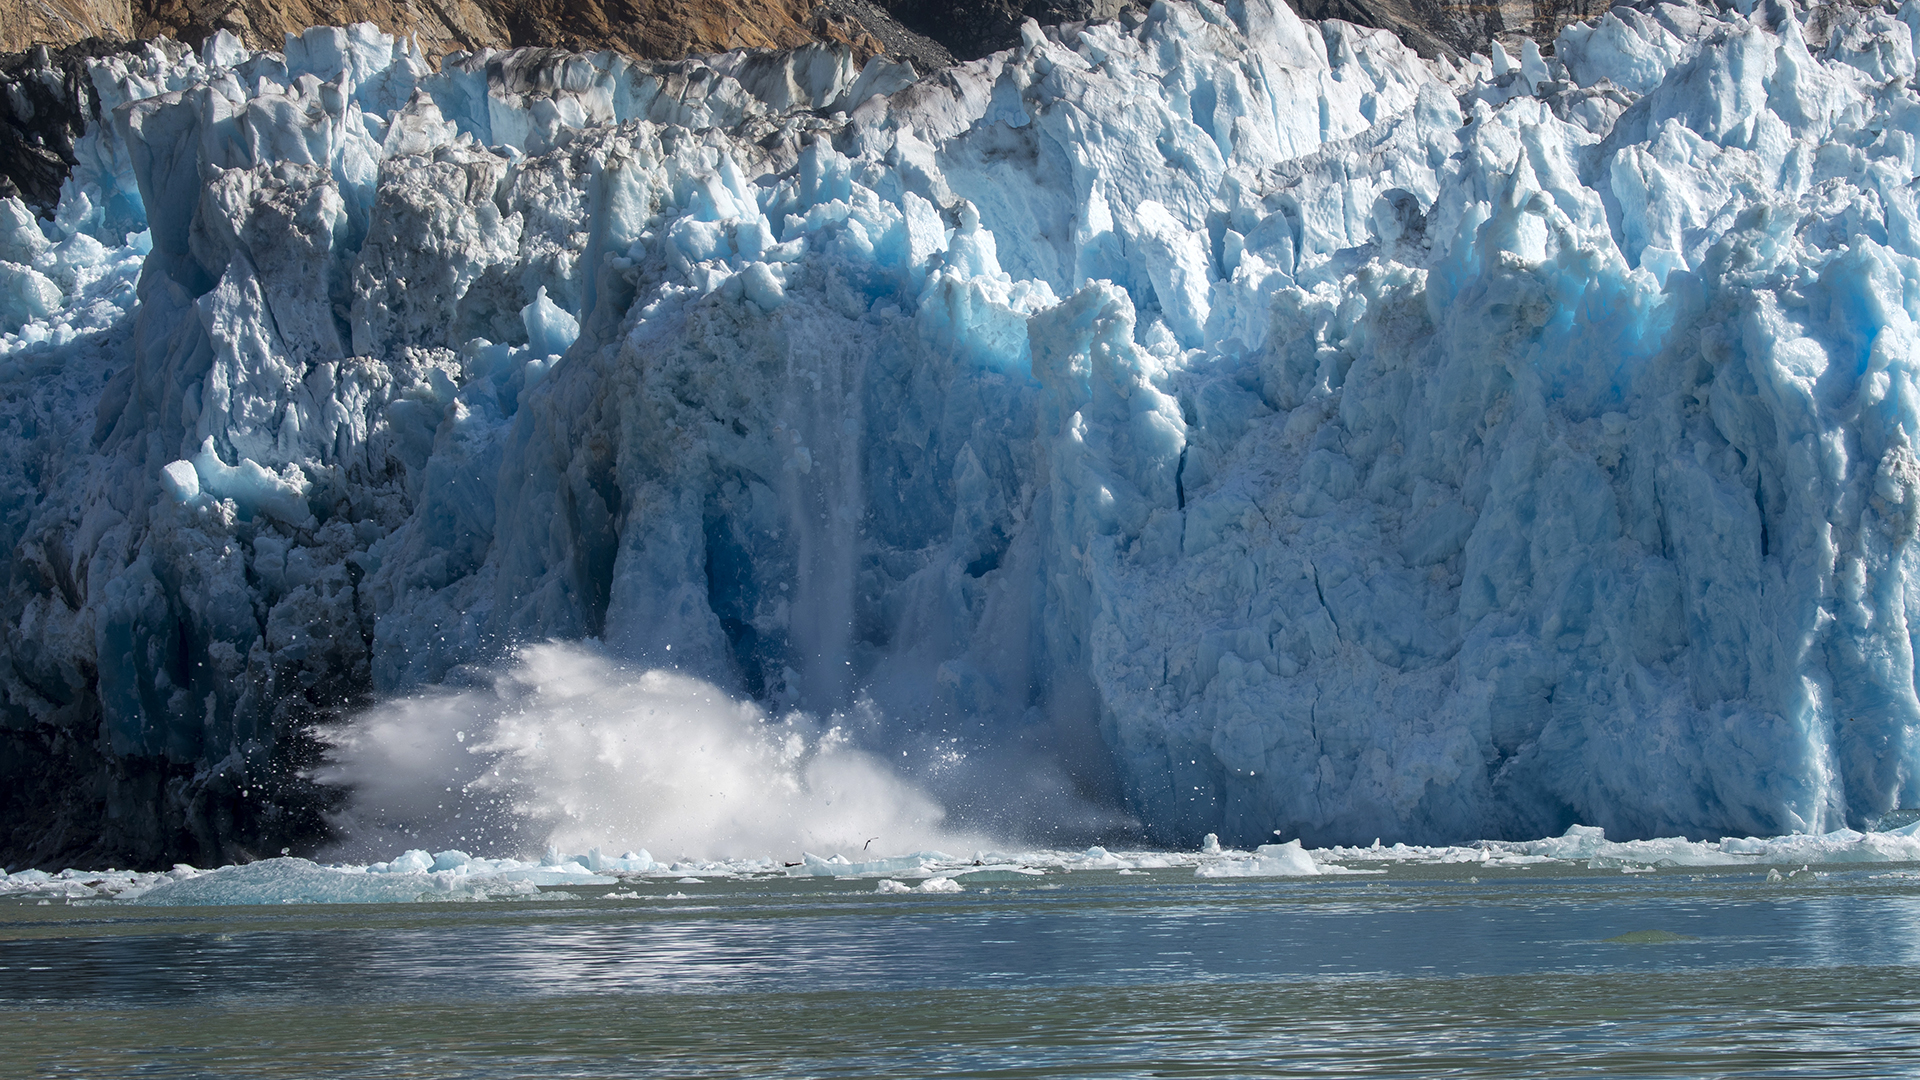 Chunks of ice are calving from the glacier face of the South